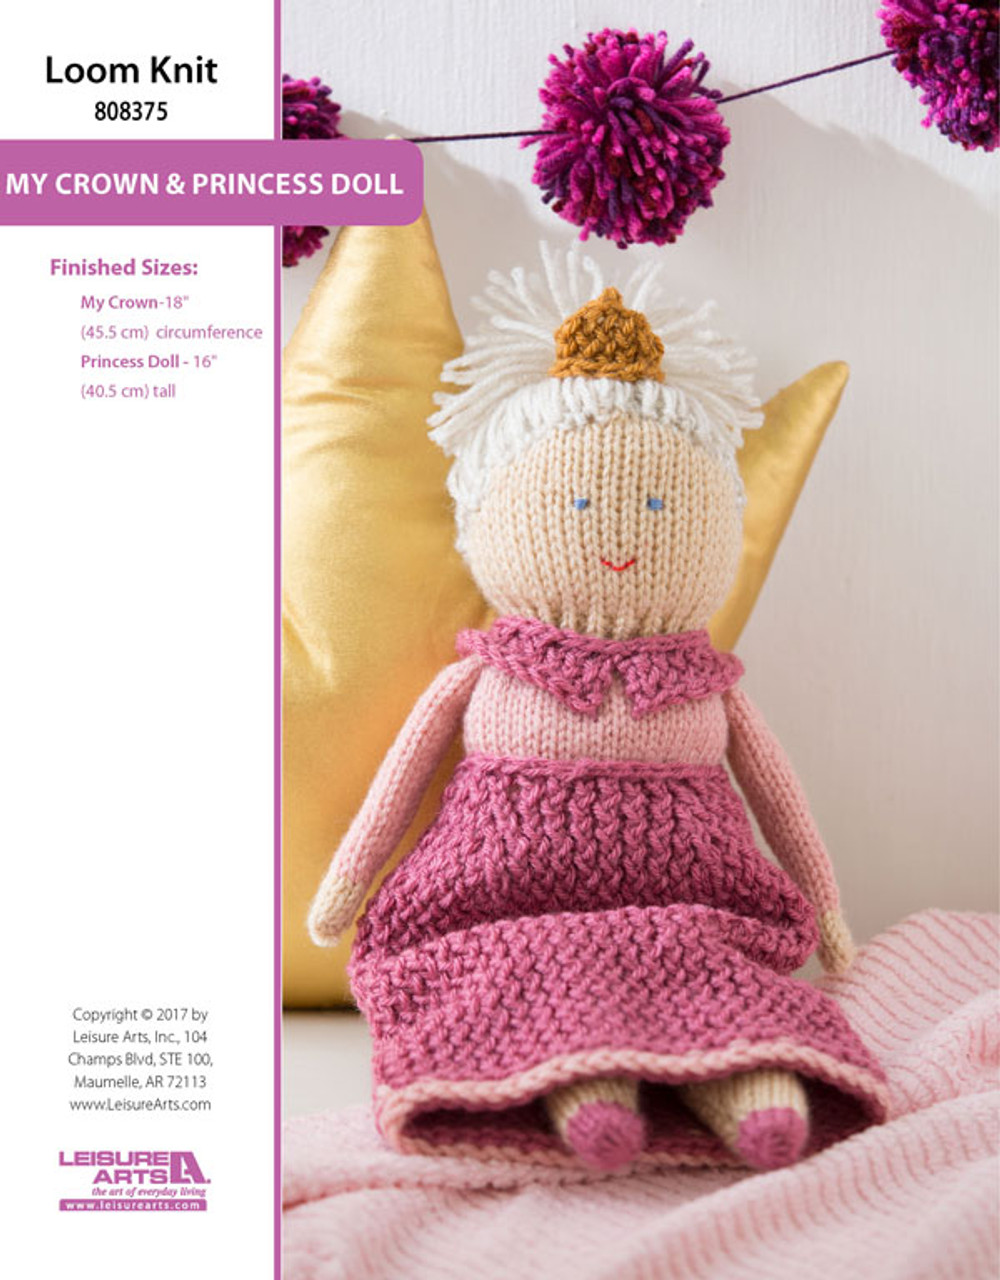 Leisure Arts Loom Knit Toys Knitting Book